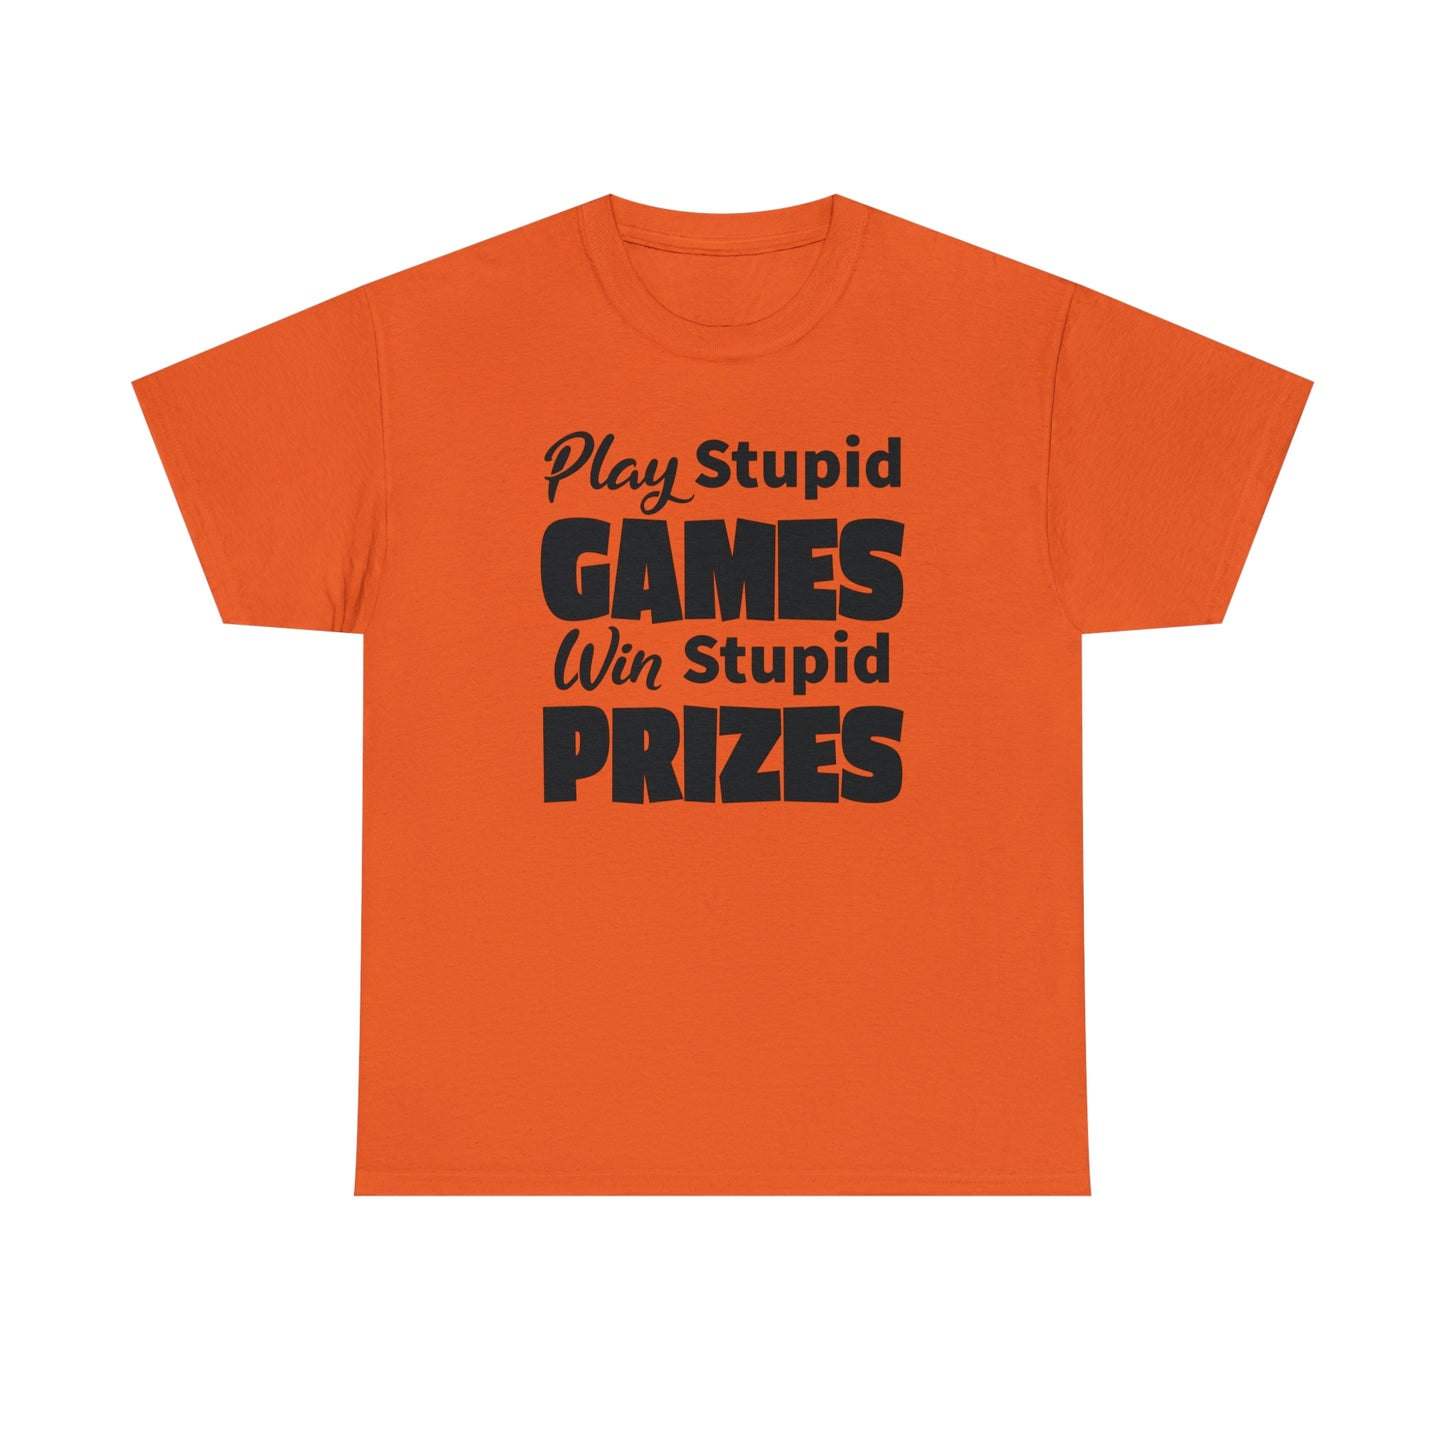 Sarcastic TShirt For Stupid Games T-Shirt For Stupid Prizes T Shirt For Funny Games Shirt For Fun Gift Shirt For Games Tee